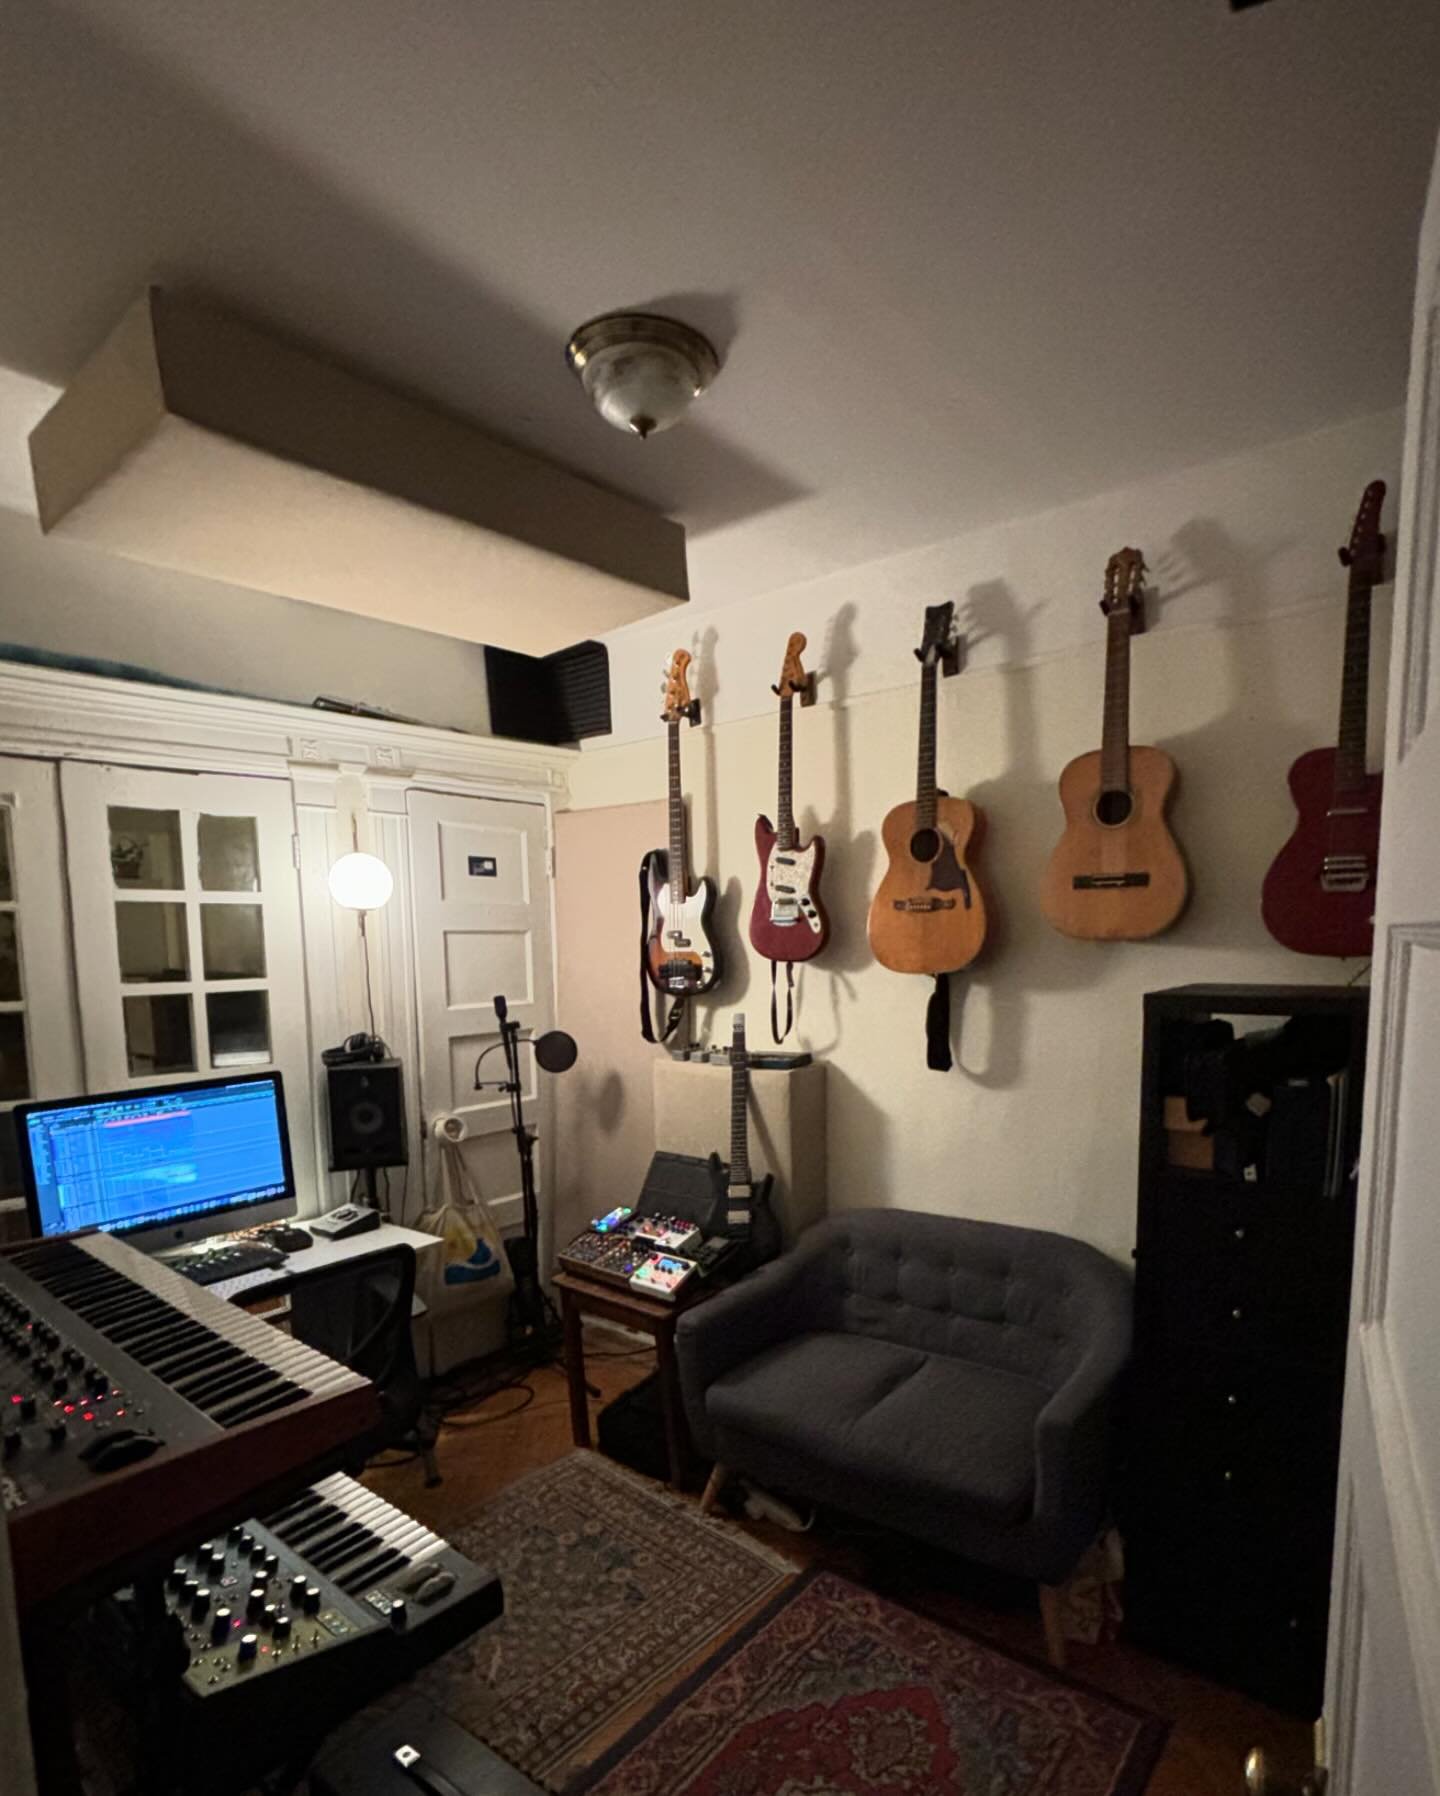 hi my studio doesn&rsquo;t have a name but some people call it &ldquo;figure nate recording&rdquo; or &ldquo;the st&uuml;&rdquo; or &ldquo;nate&rsquo;s little zone&rdquo; or &ldquo;paul thomas jamderson&rdquo; or &ldquo;home of the hits&rdquo; or &ld